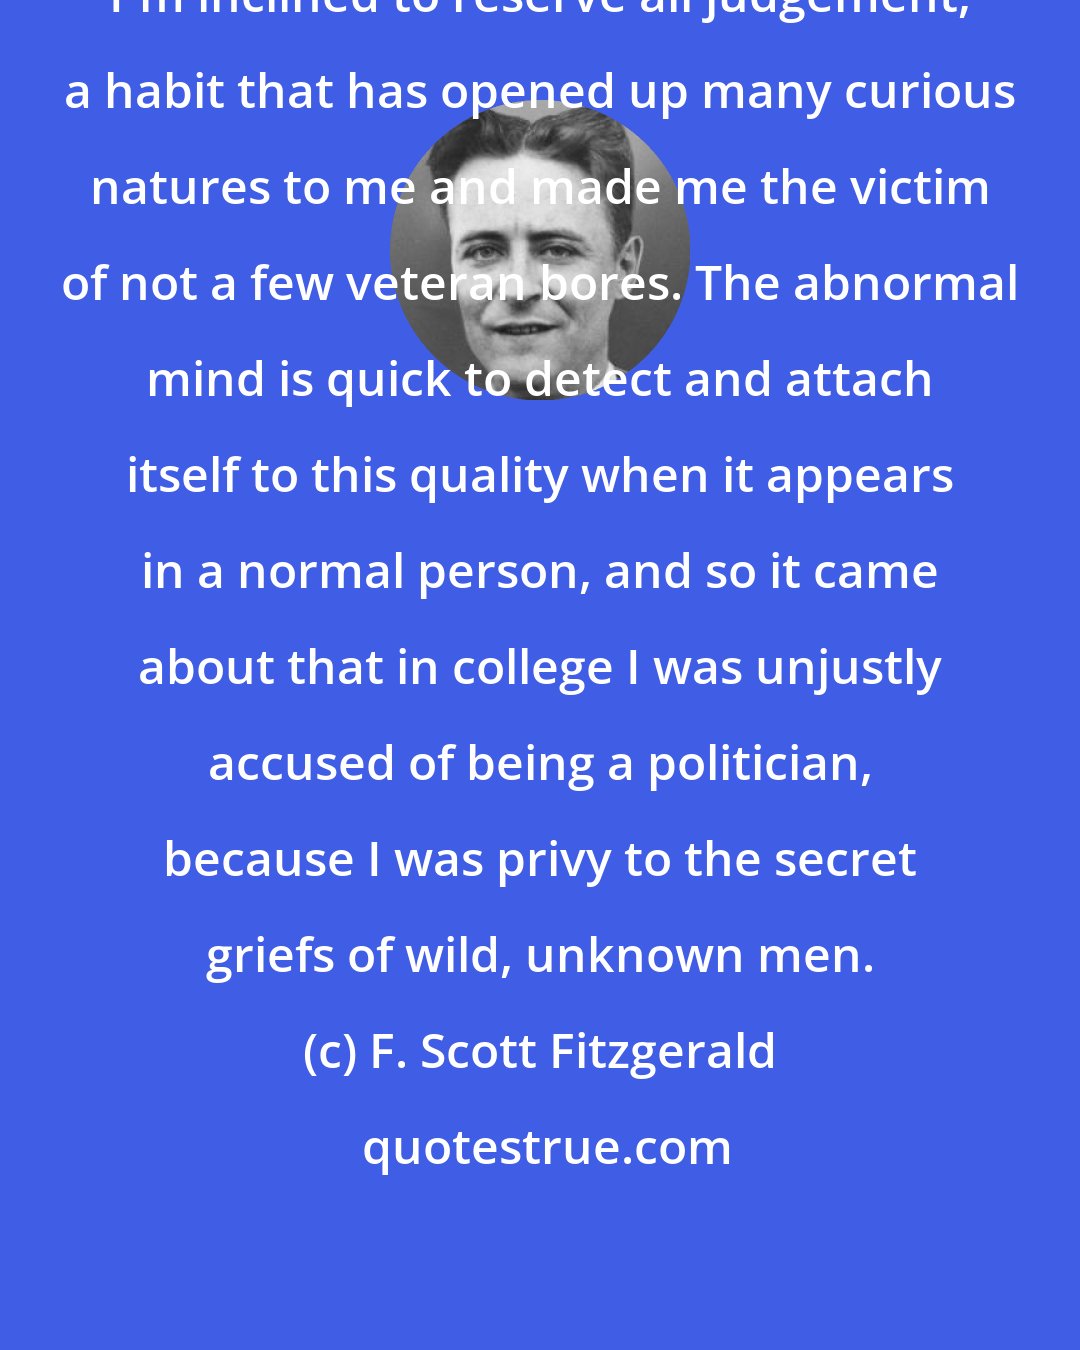 F. Scott Fitzgerald: I'm inclined to reserve all judgement, a habit that has opened up many curious natures to me and made me the victim of not a few veteran bores. The abnormal mind is quick to detect and attach itself to this quality when it appears in a normal person, and so it came about that in college I was unjustly accused of being a politician, because I was privy to the secret griefs of wild, unknown men.